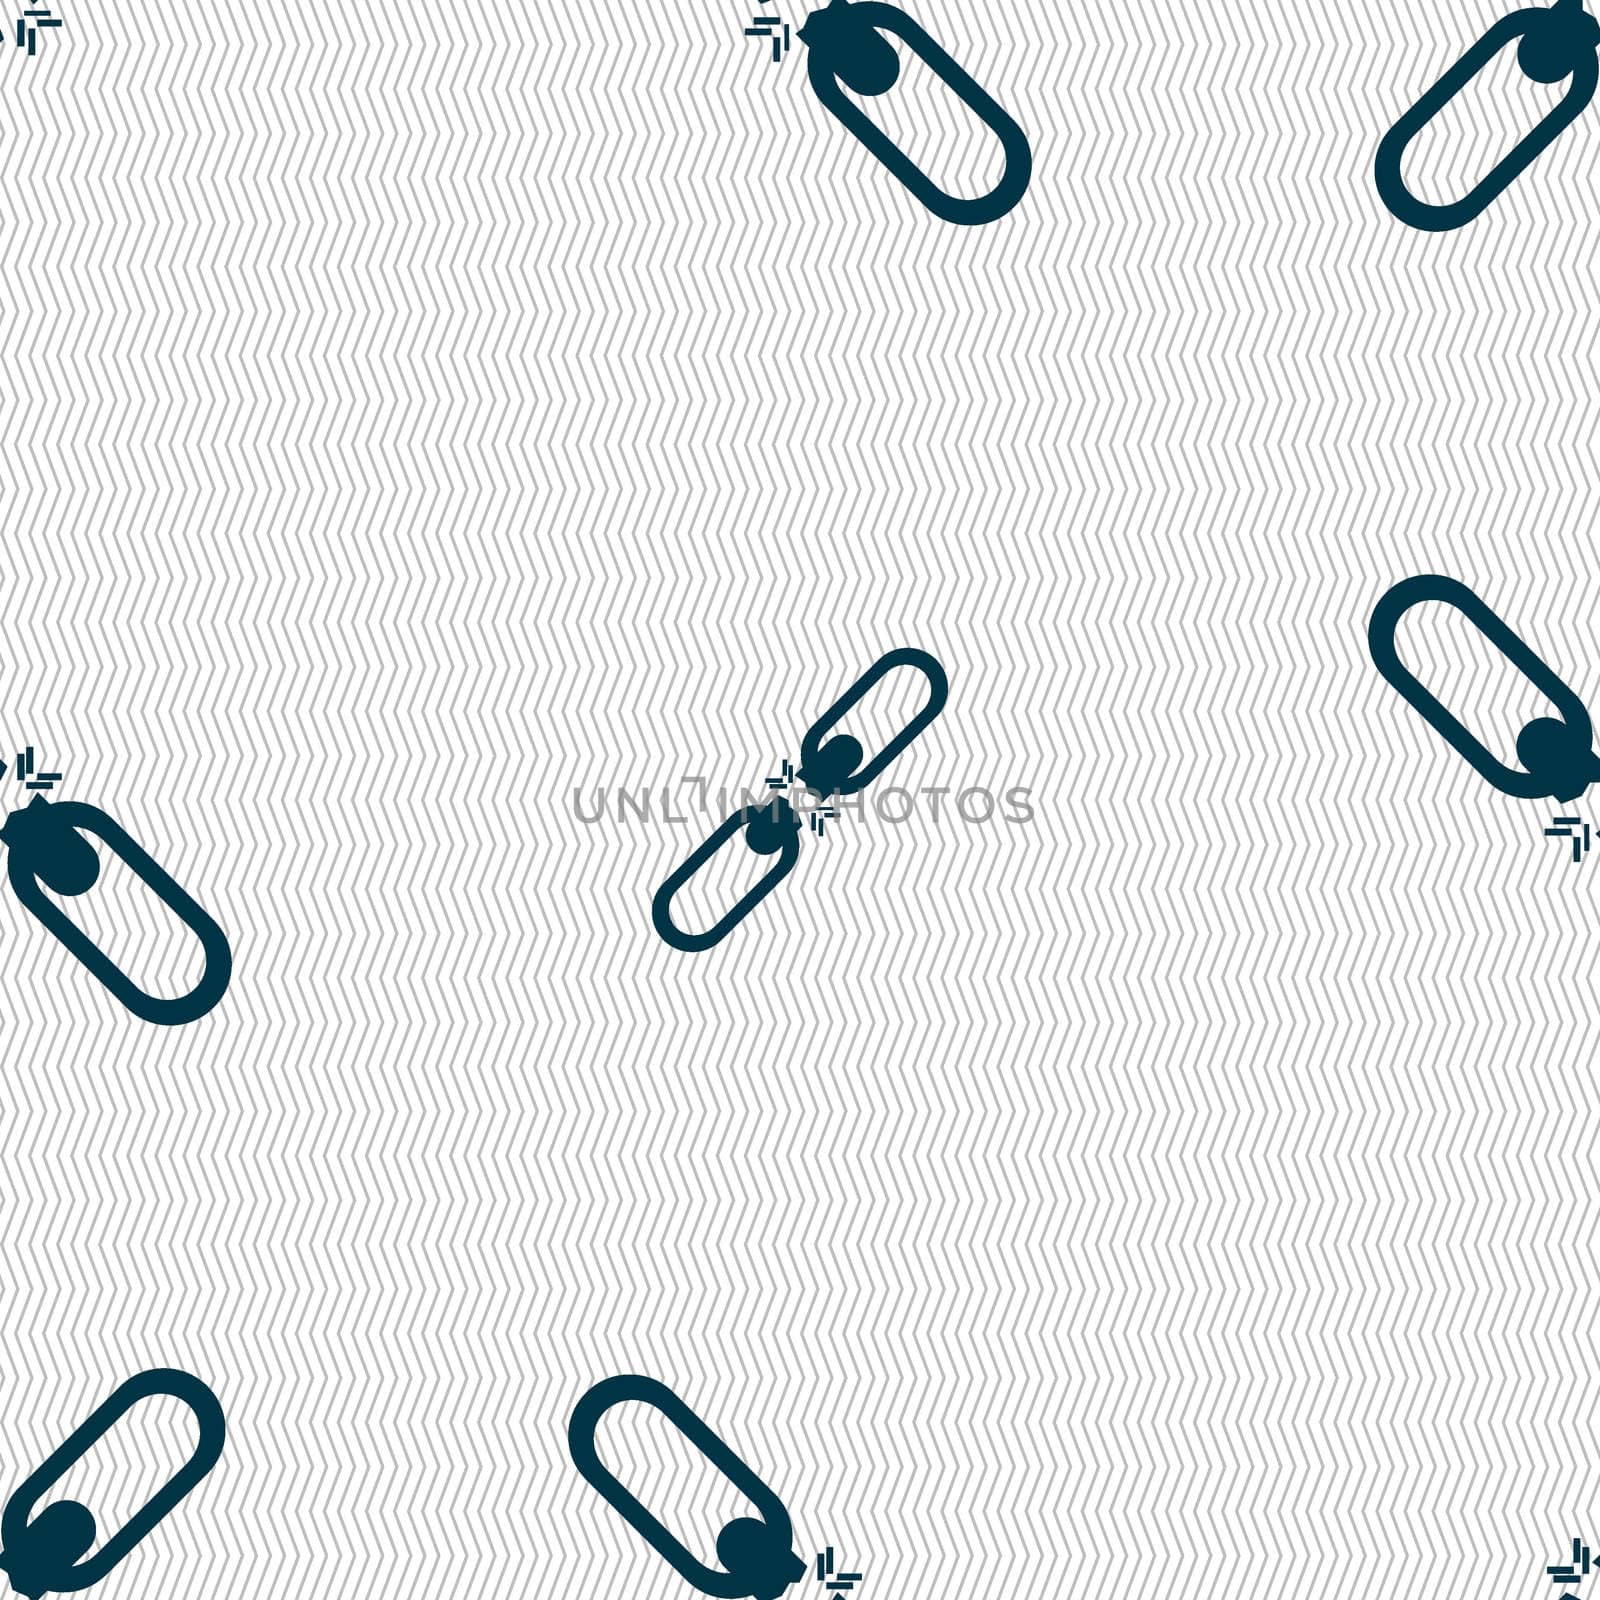 Broken connection flat single icon. Seamless abstract background with geometric shapes. illustration